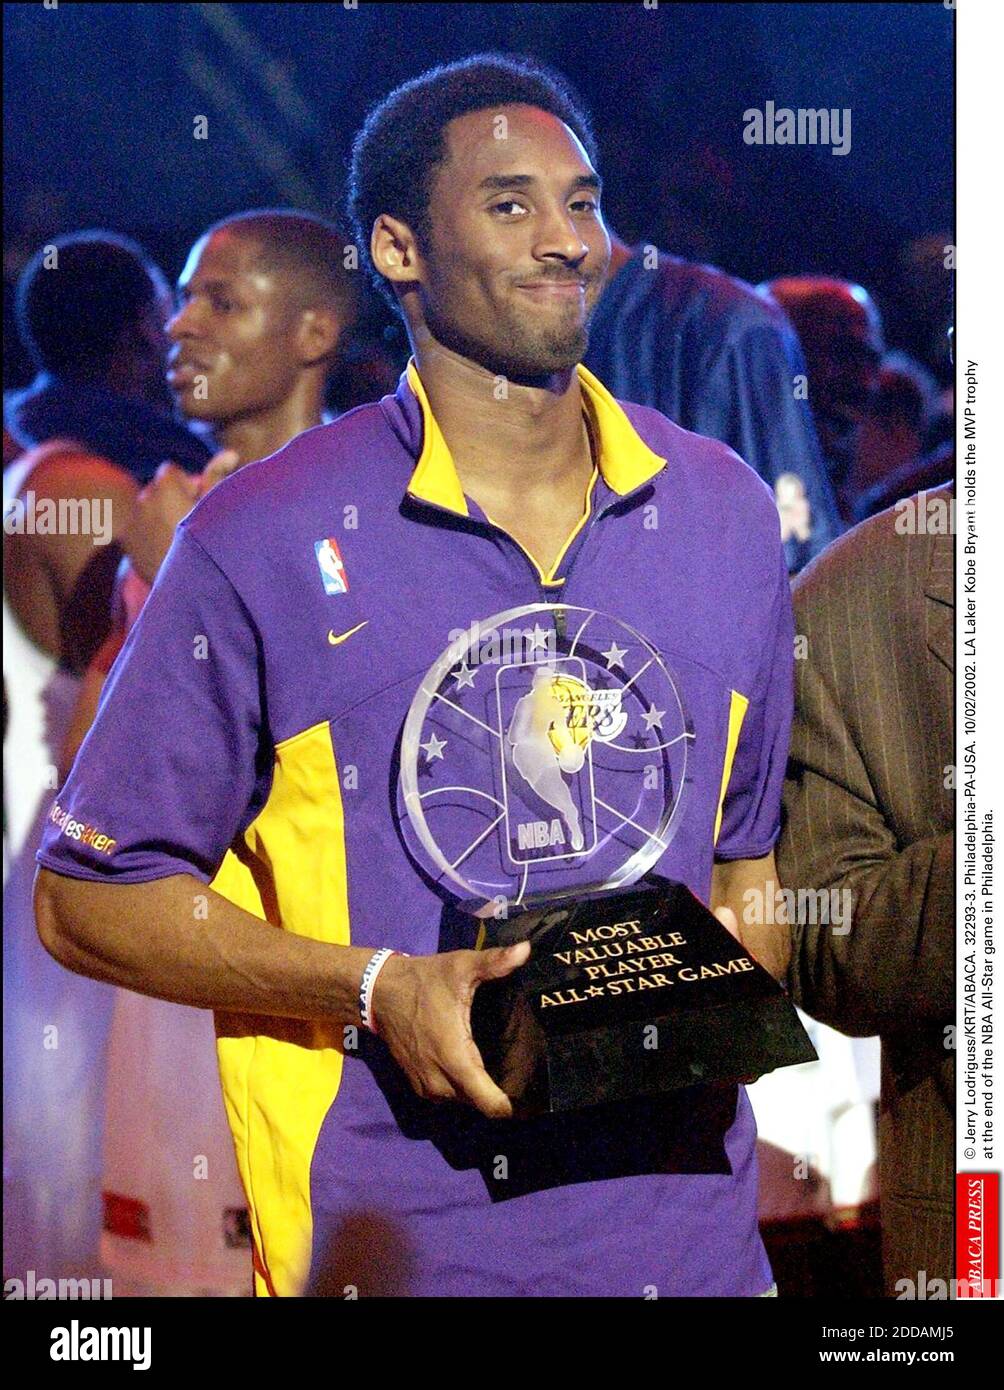 NO FILM, NO VIDEO, NO TV, NO DOCUMENTARY - © Jerry Lodriguss/KRT/ABACA. 32293-3. Philadelphia-PA-USA. 10/02/2002. LA Laker Kobe Bryant holds the MVP trophy at the end of the NBA All-Star game in Philadelphia. Stock Photo